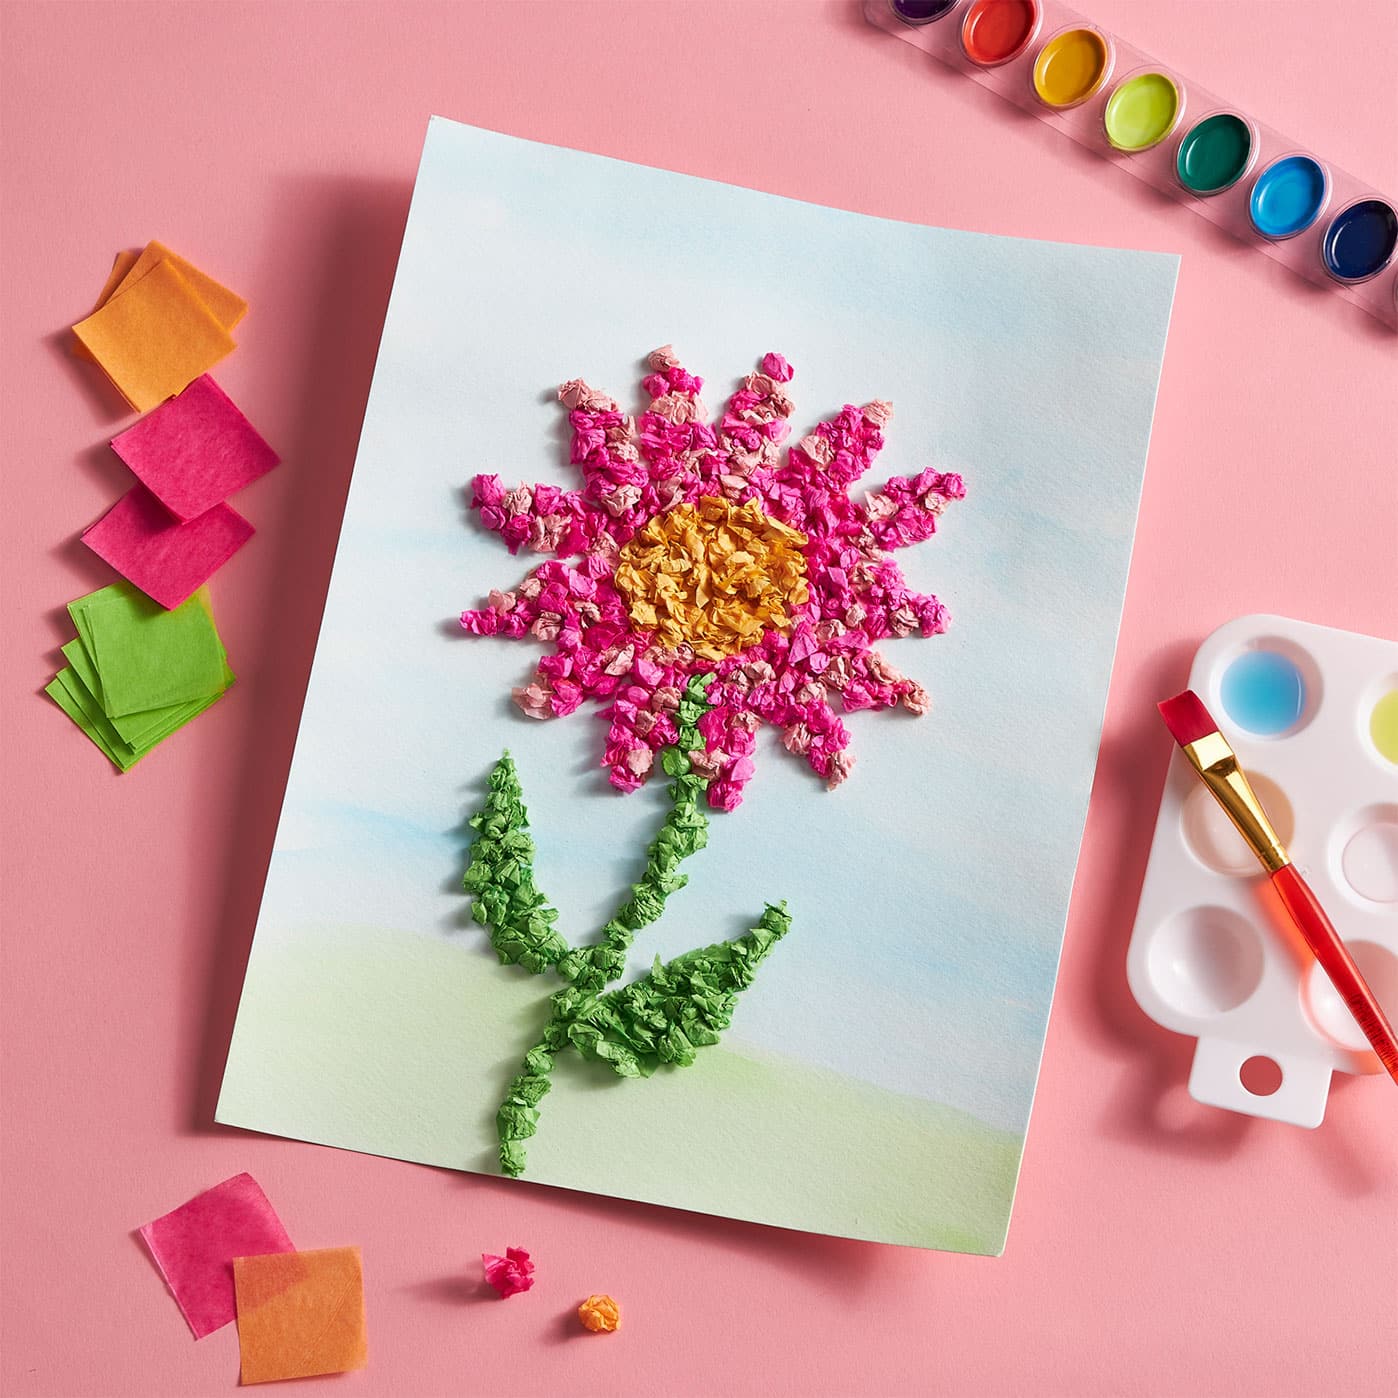 30 Gorgeous Paper Craft Ideas - Hey Let's Make Stuff